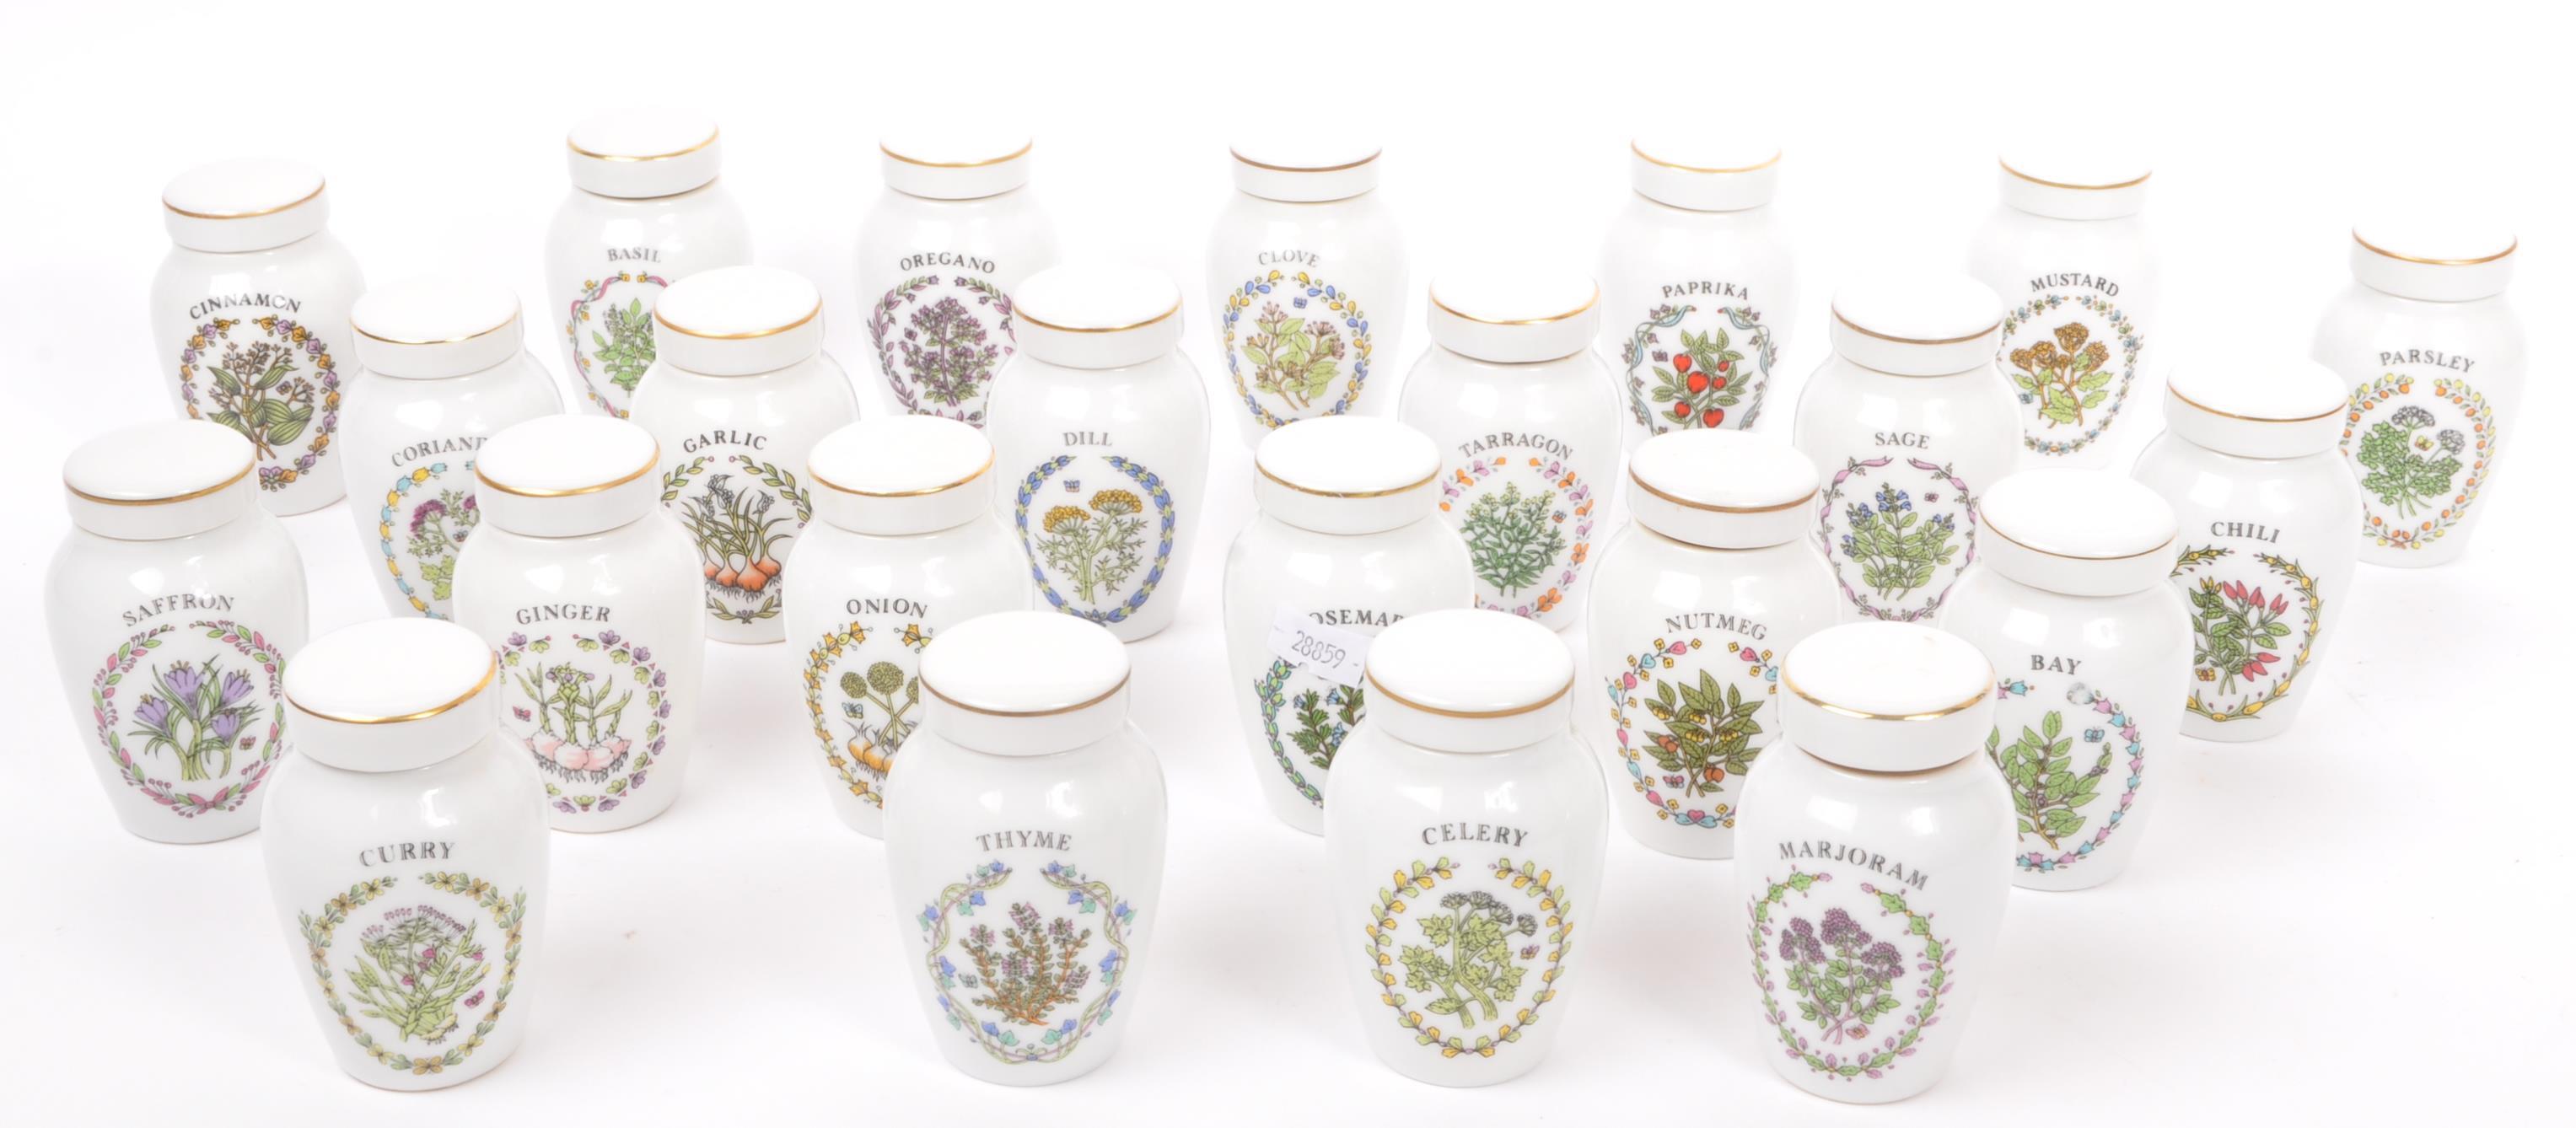 THE FRANKLIN MINT - GLORIA CONCEPTS INC - SPICE / HERB JARS - Image 2 of 11